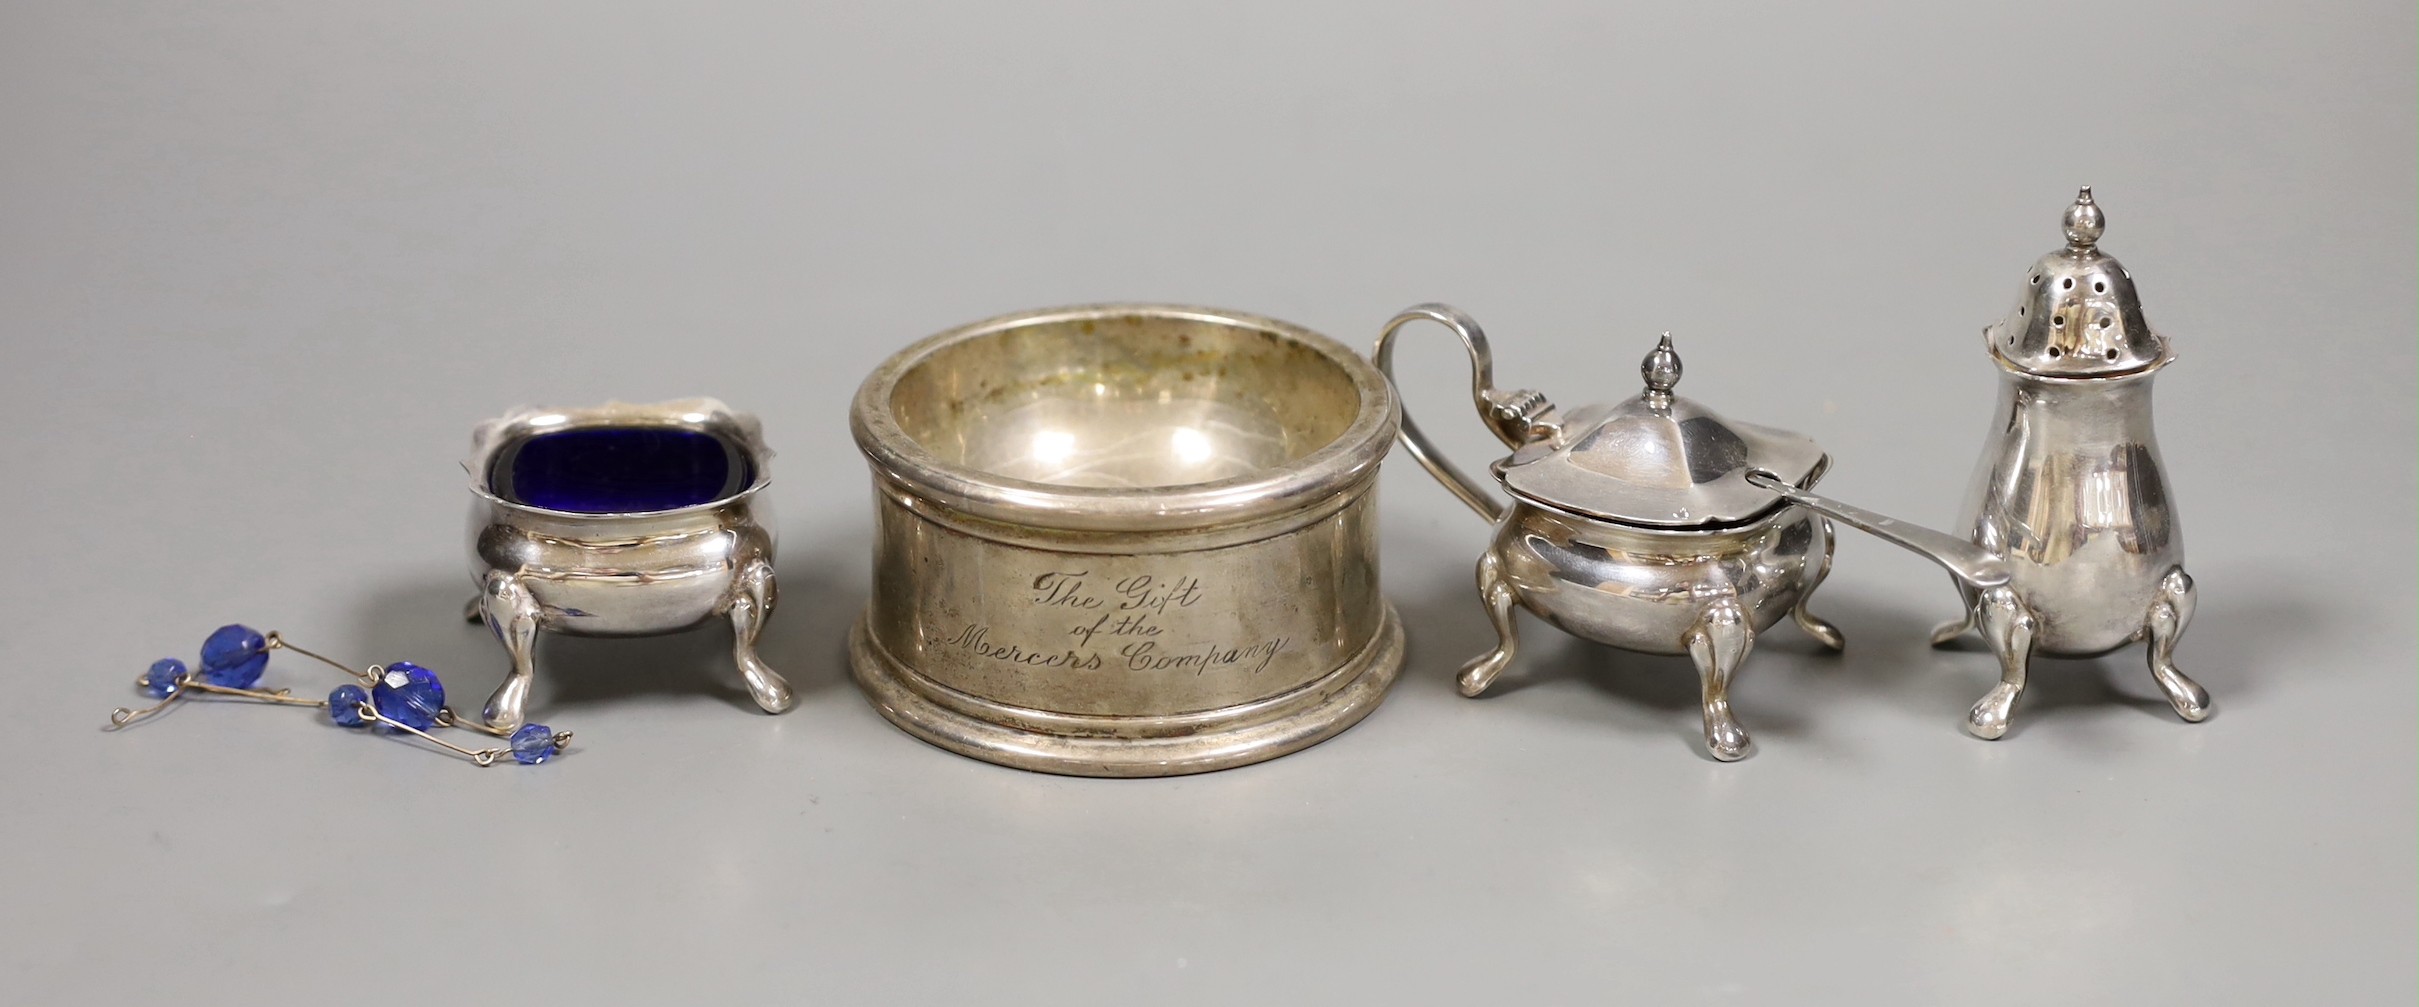 A George V silver jubilee commemorative trencher salt, London 1935, 5oz, and a three piece plated condiment set                                                                                                             